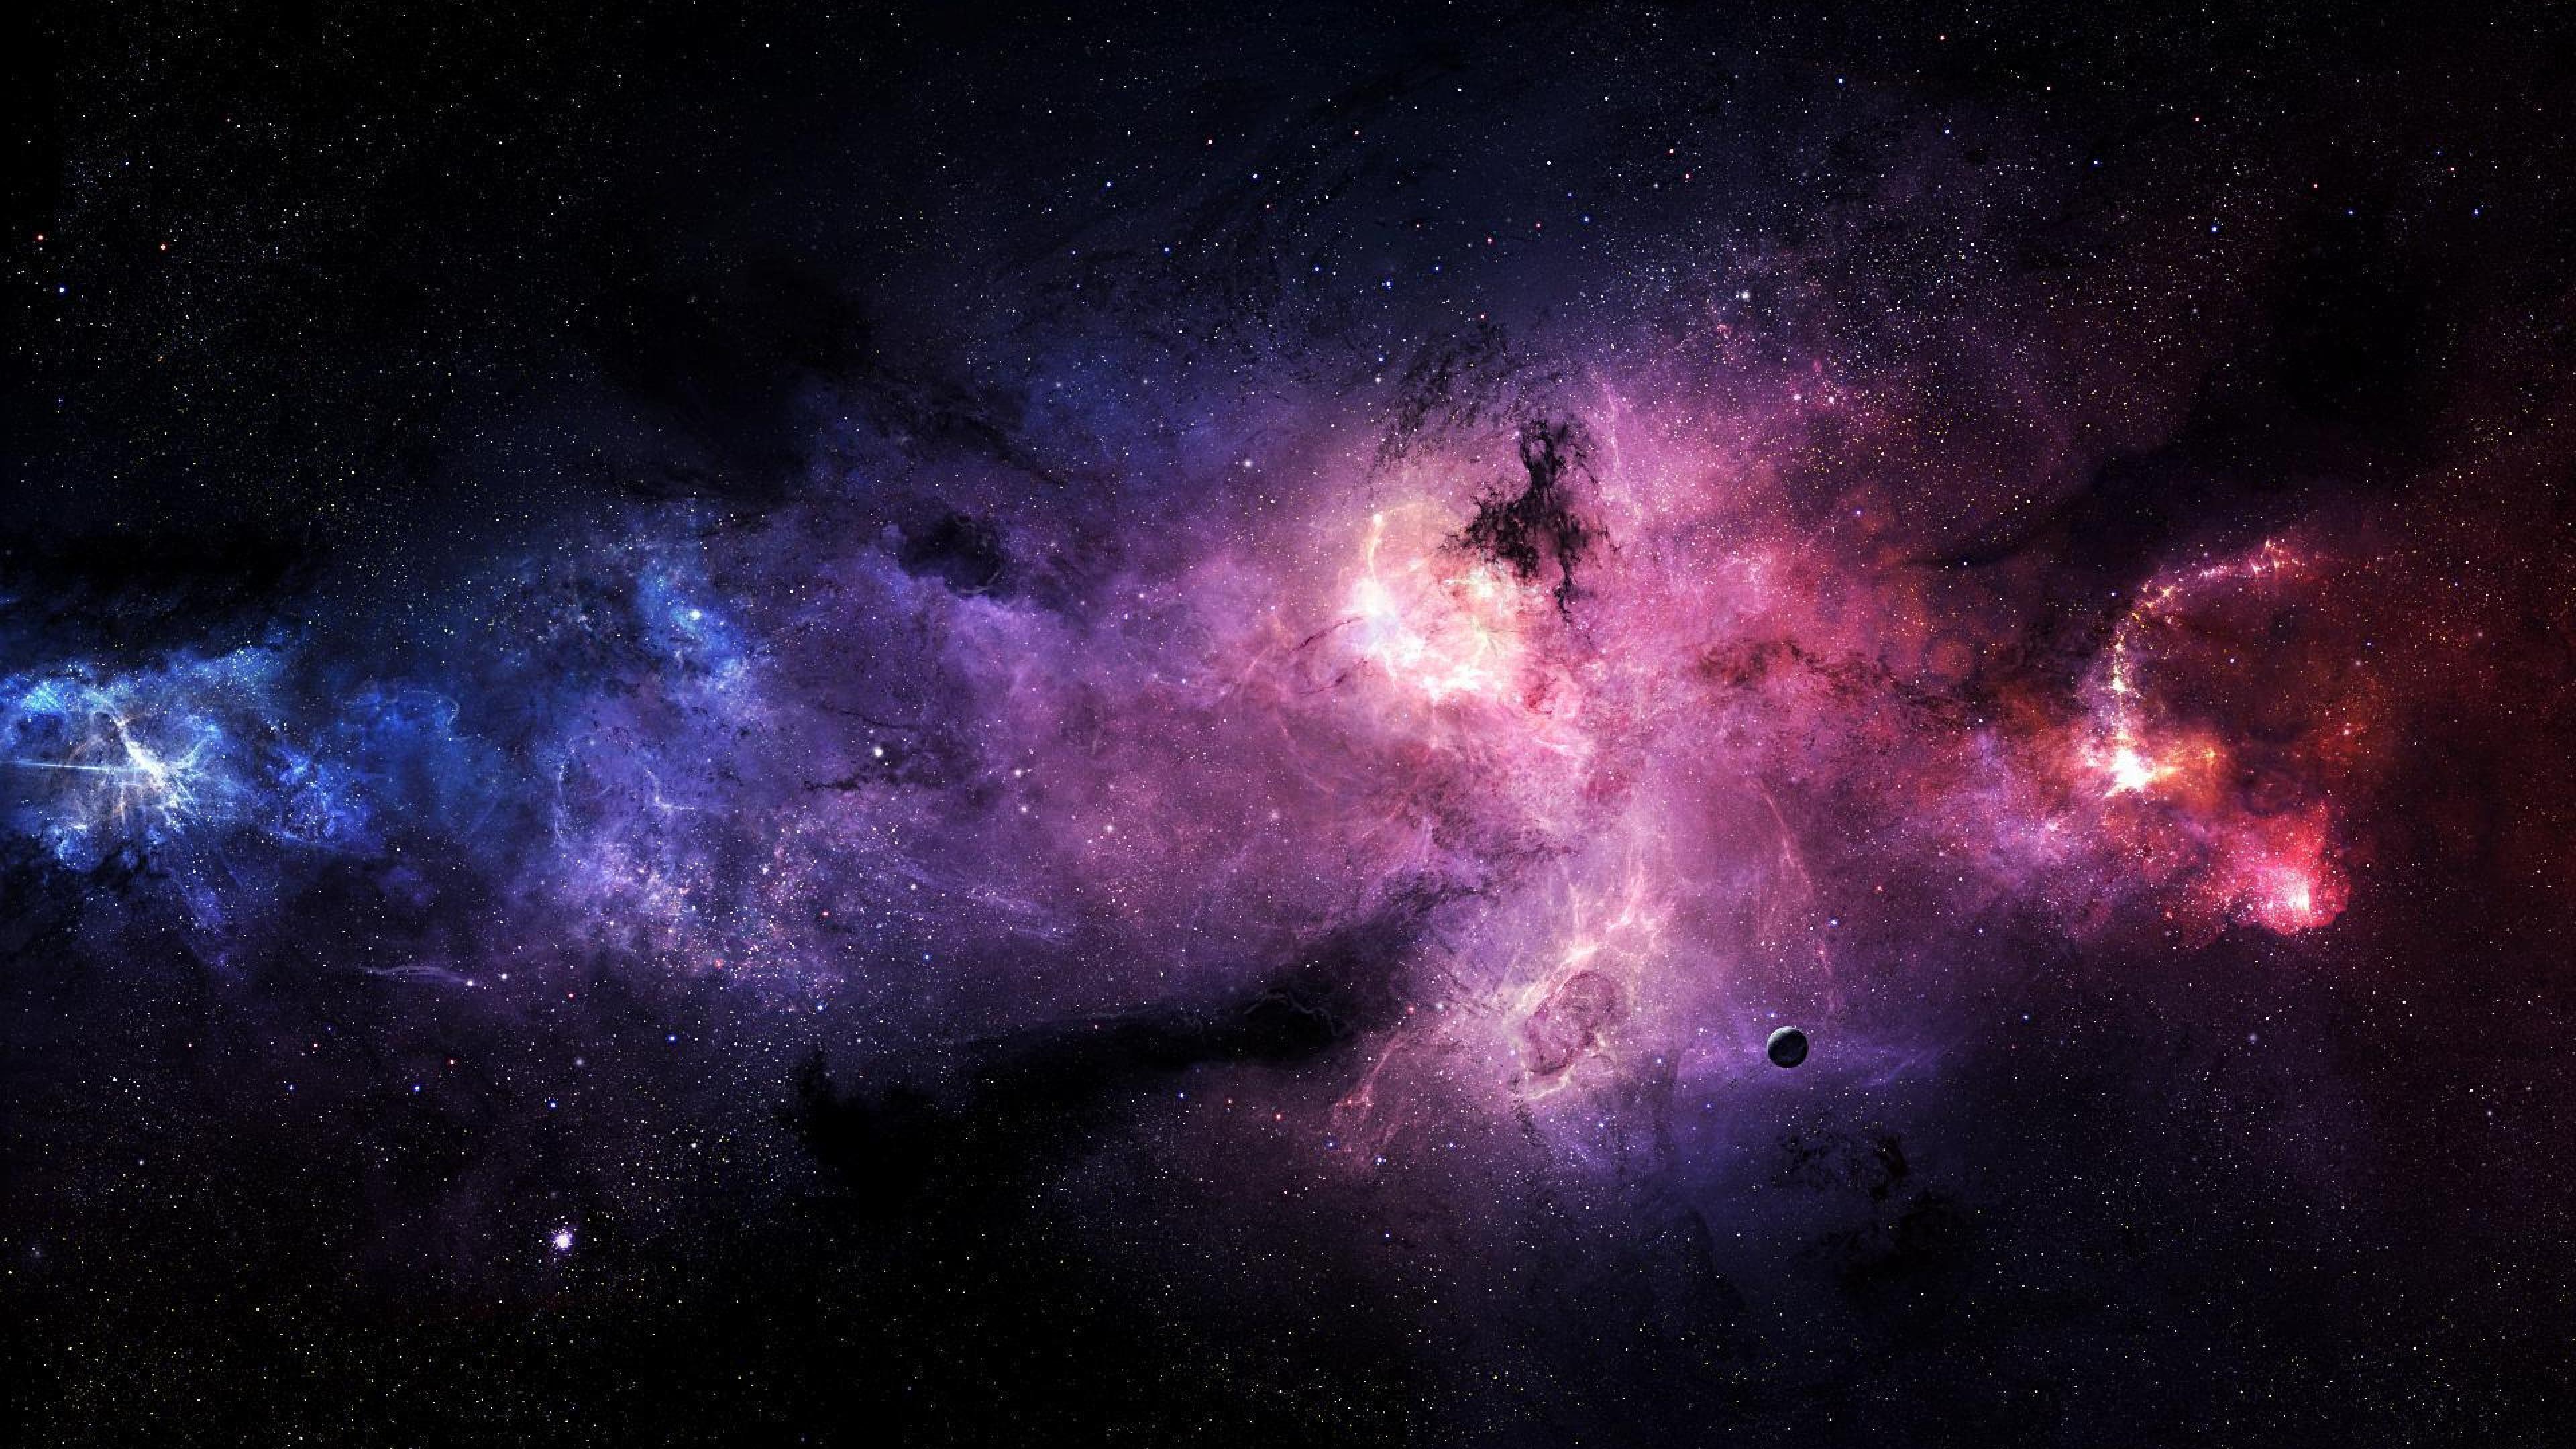 HD Space Wallpaper Find best latest HD Space Wallpaper for your PC